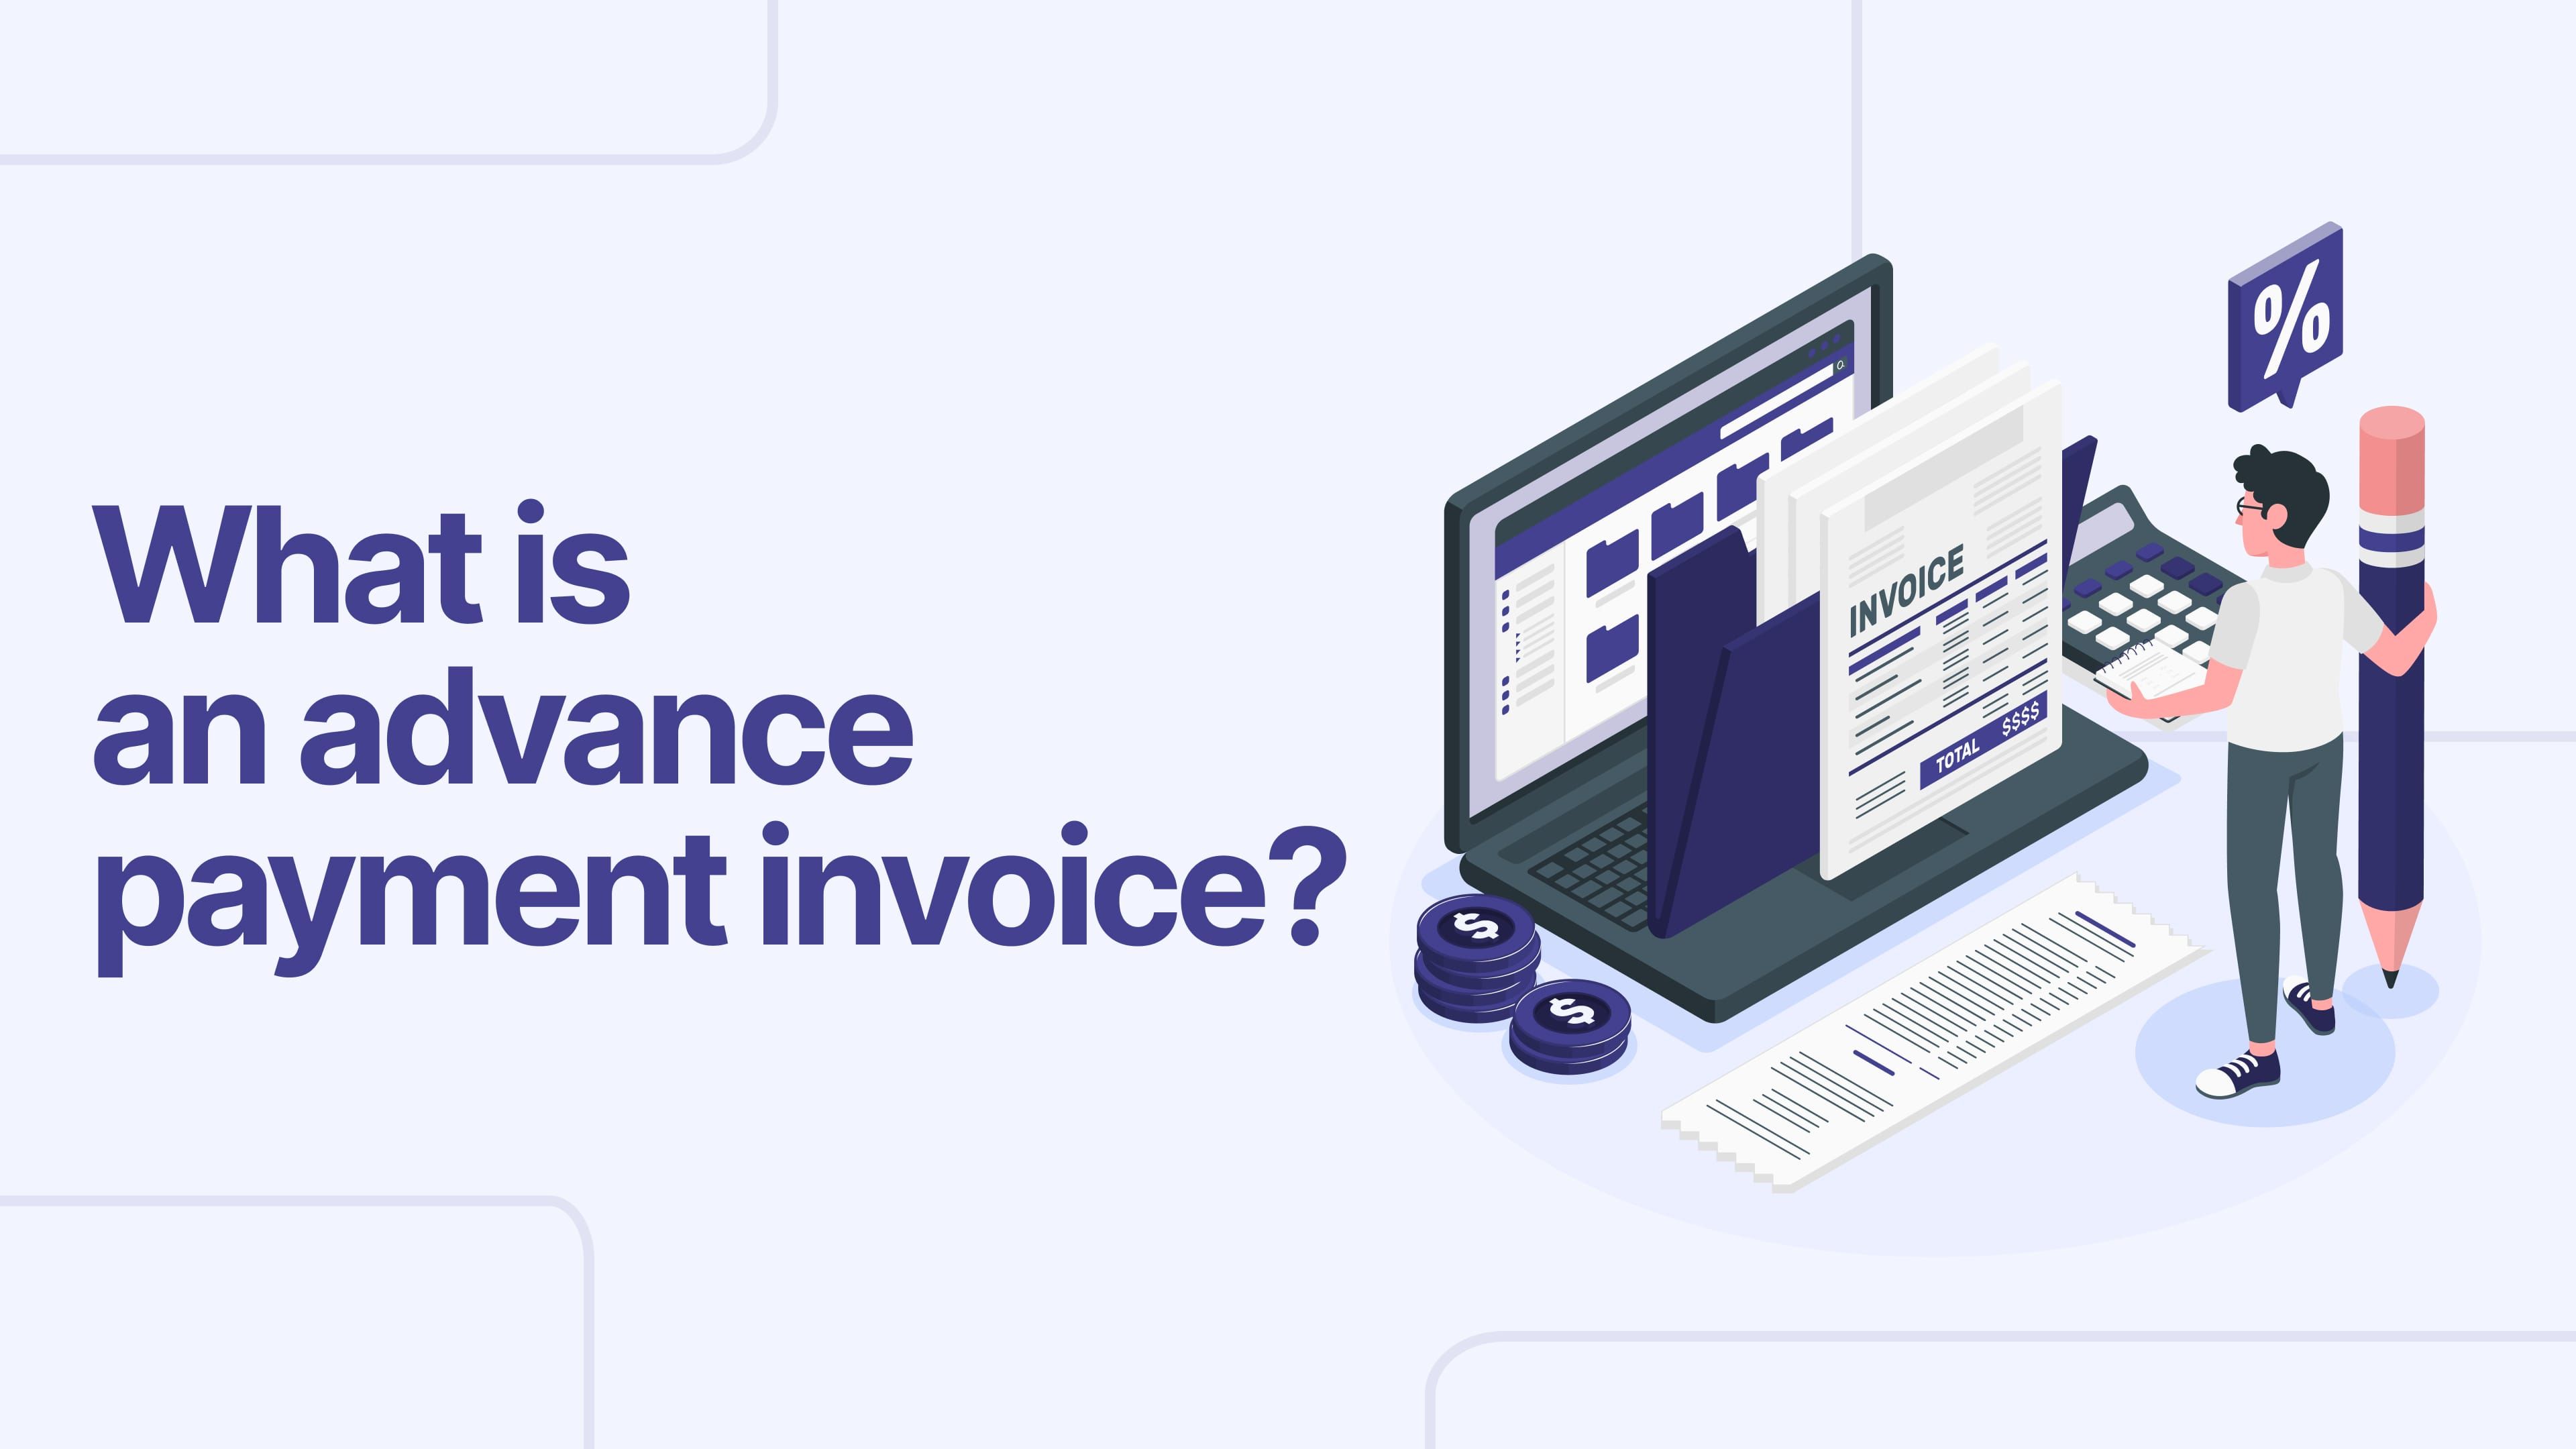 What Is an Advance Payment Invoice?